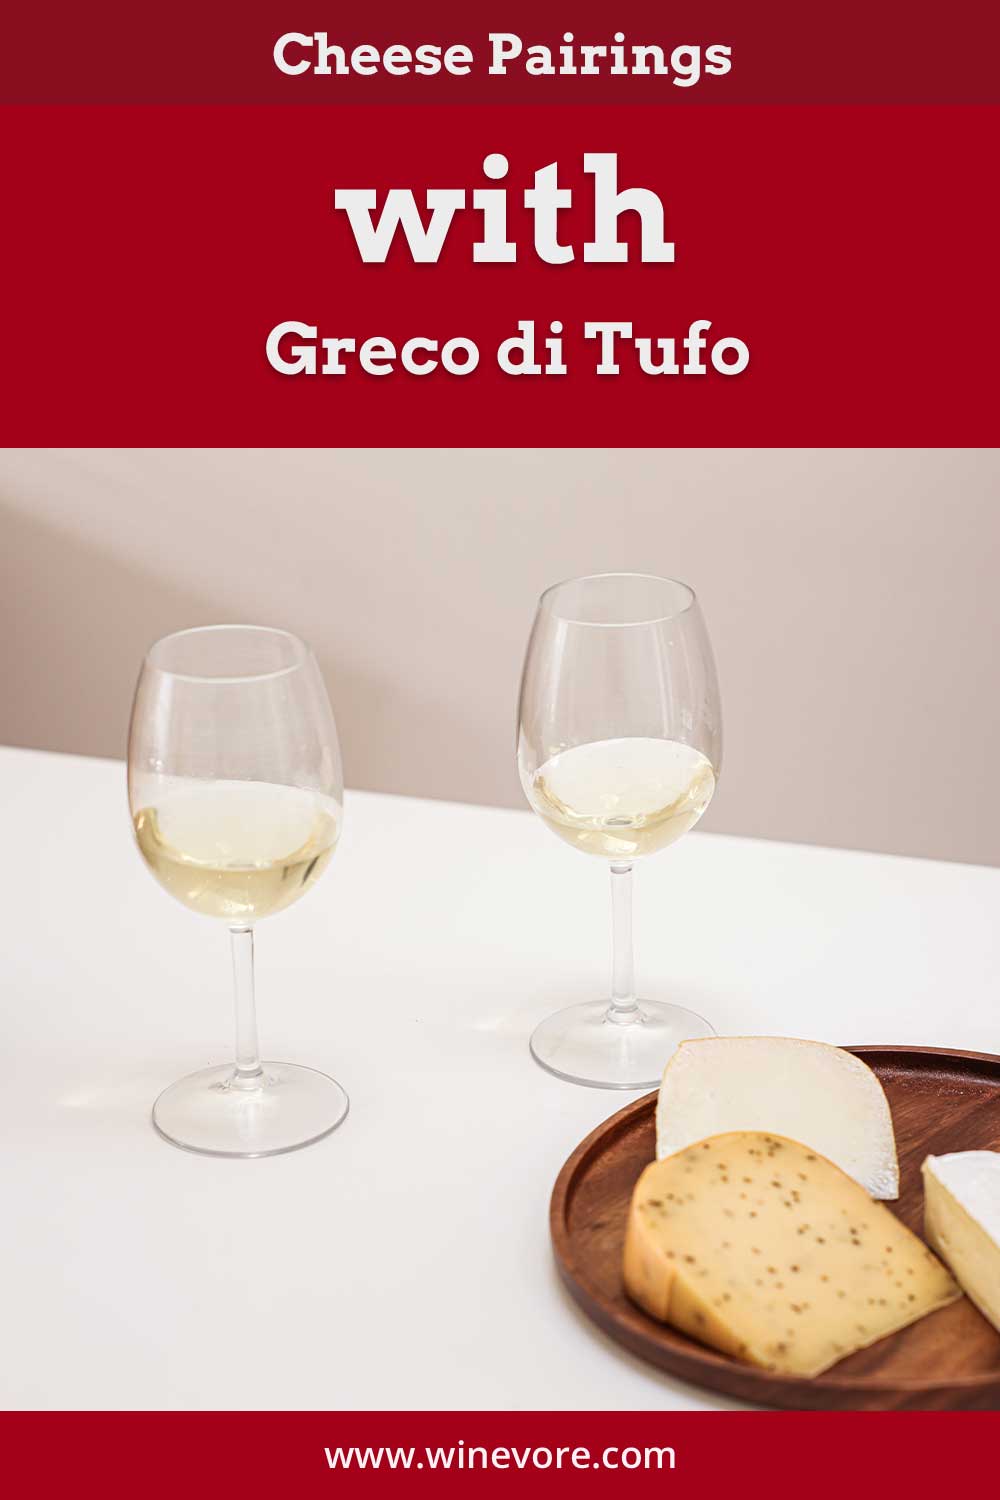 Two glasses of wine with some cheese on a white table - Cheese Pairings with Greco di Tufo.